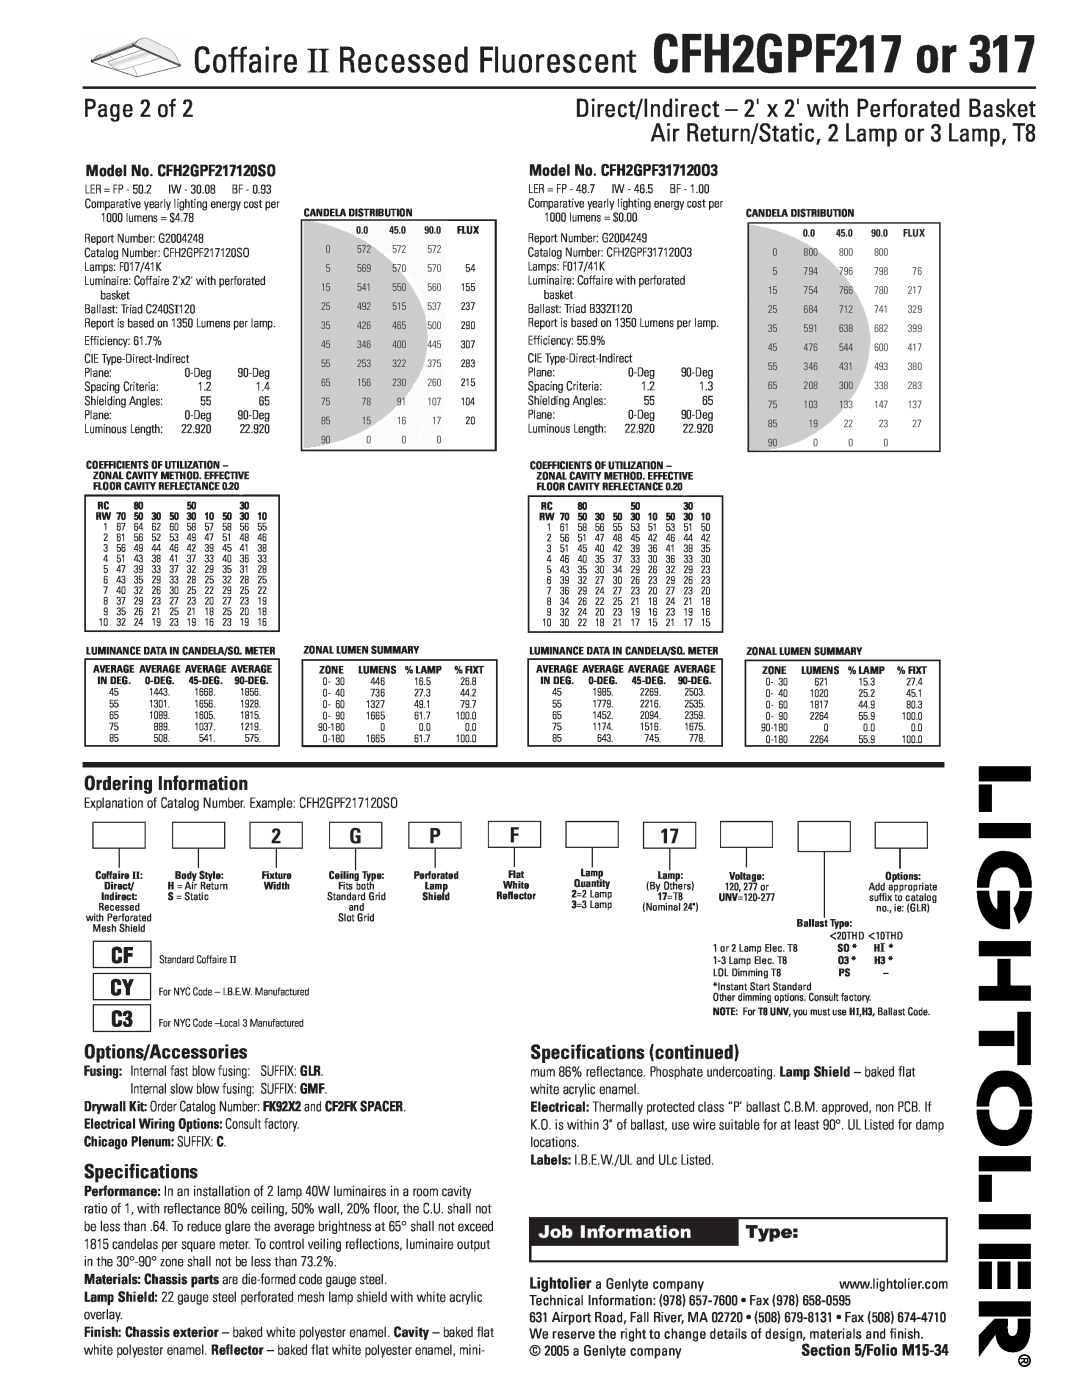 Lightolier CFH2GPF217 or 317 Page 2 of, Ordering Information, Options/Accessories, Specifications, Folio M15-34, Type 